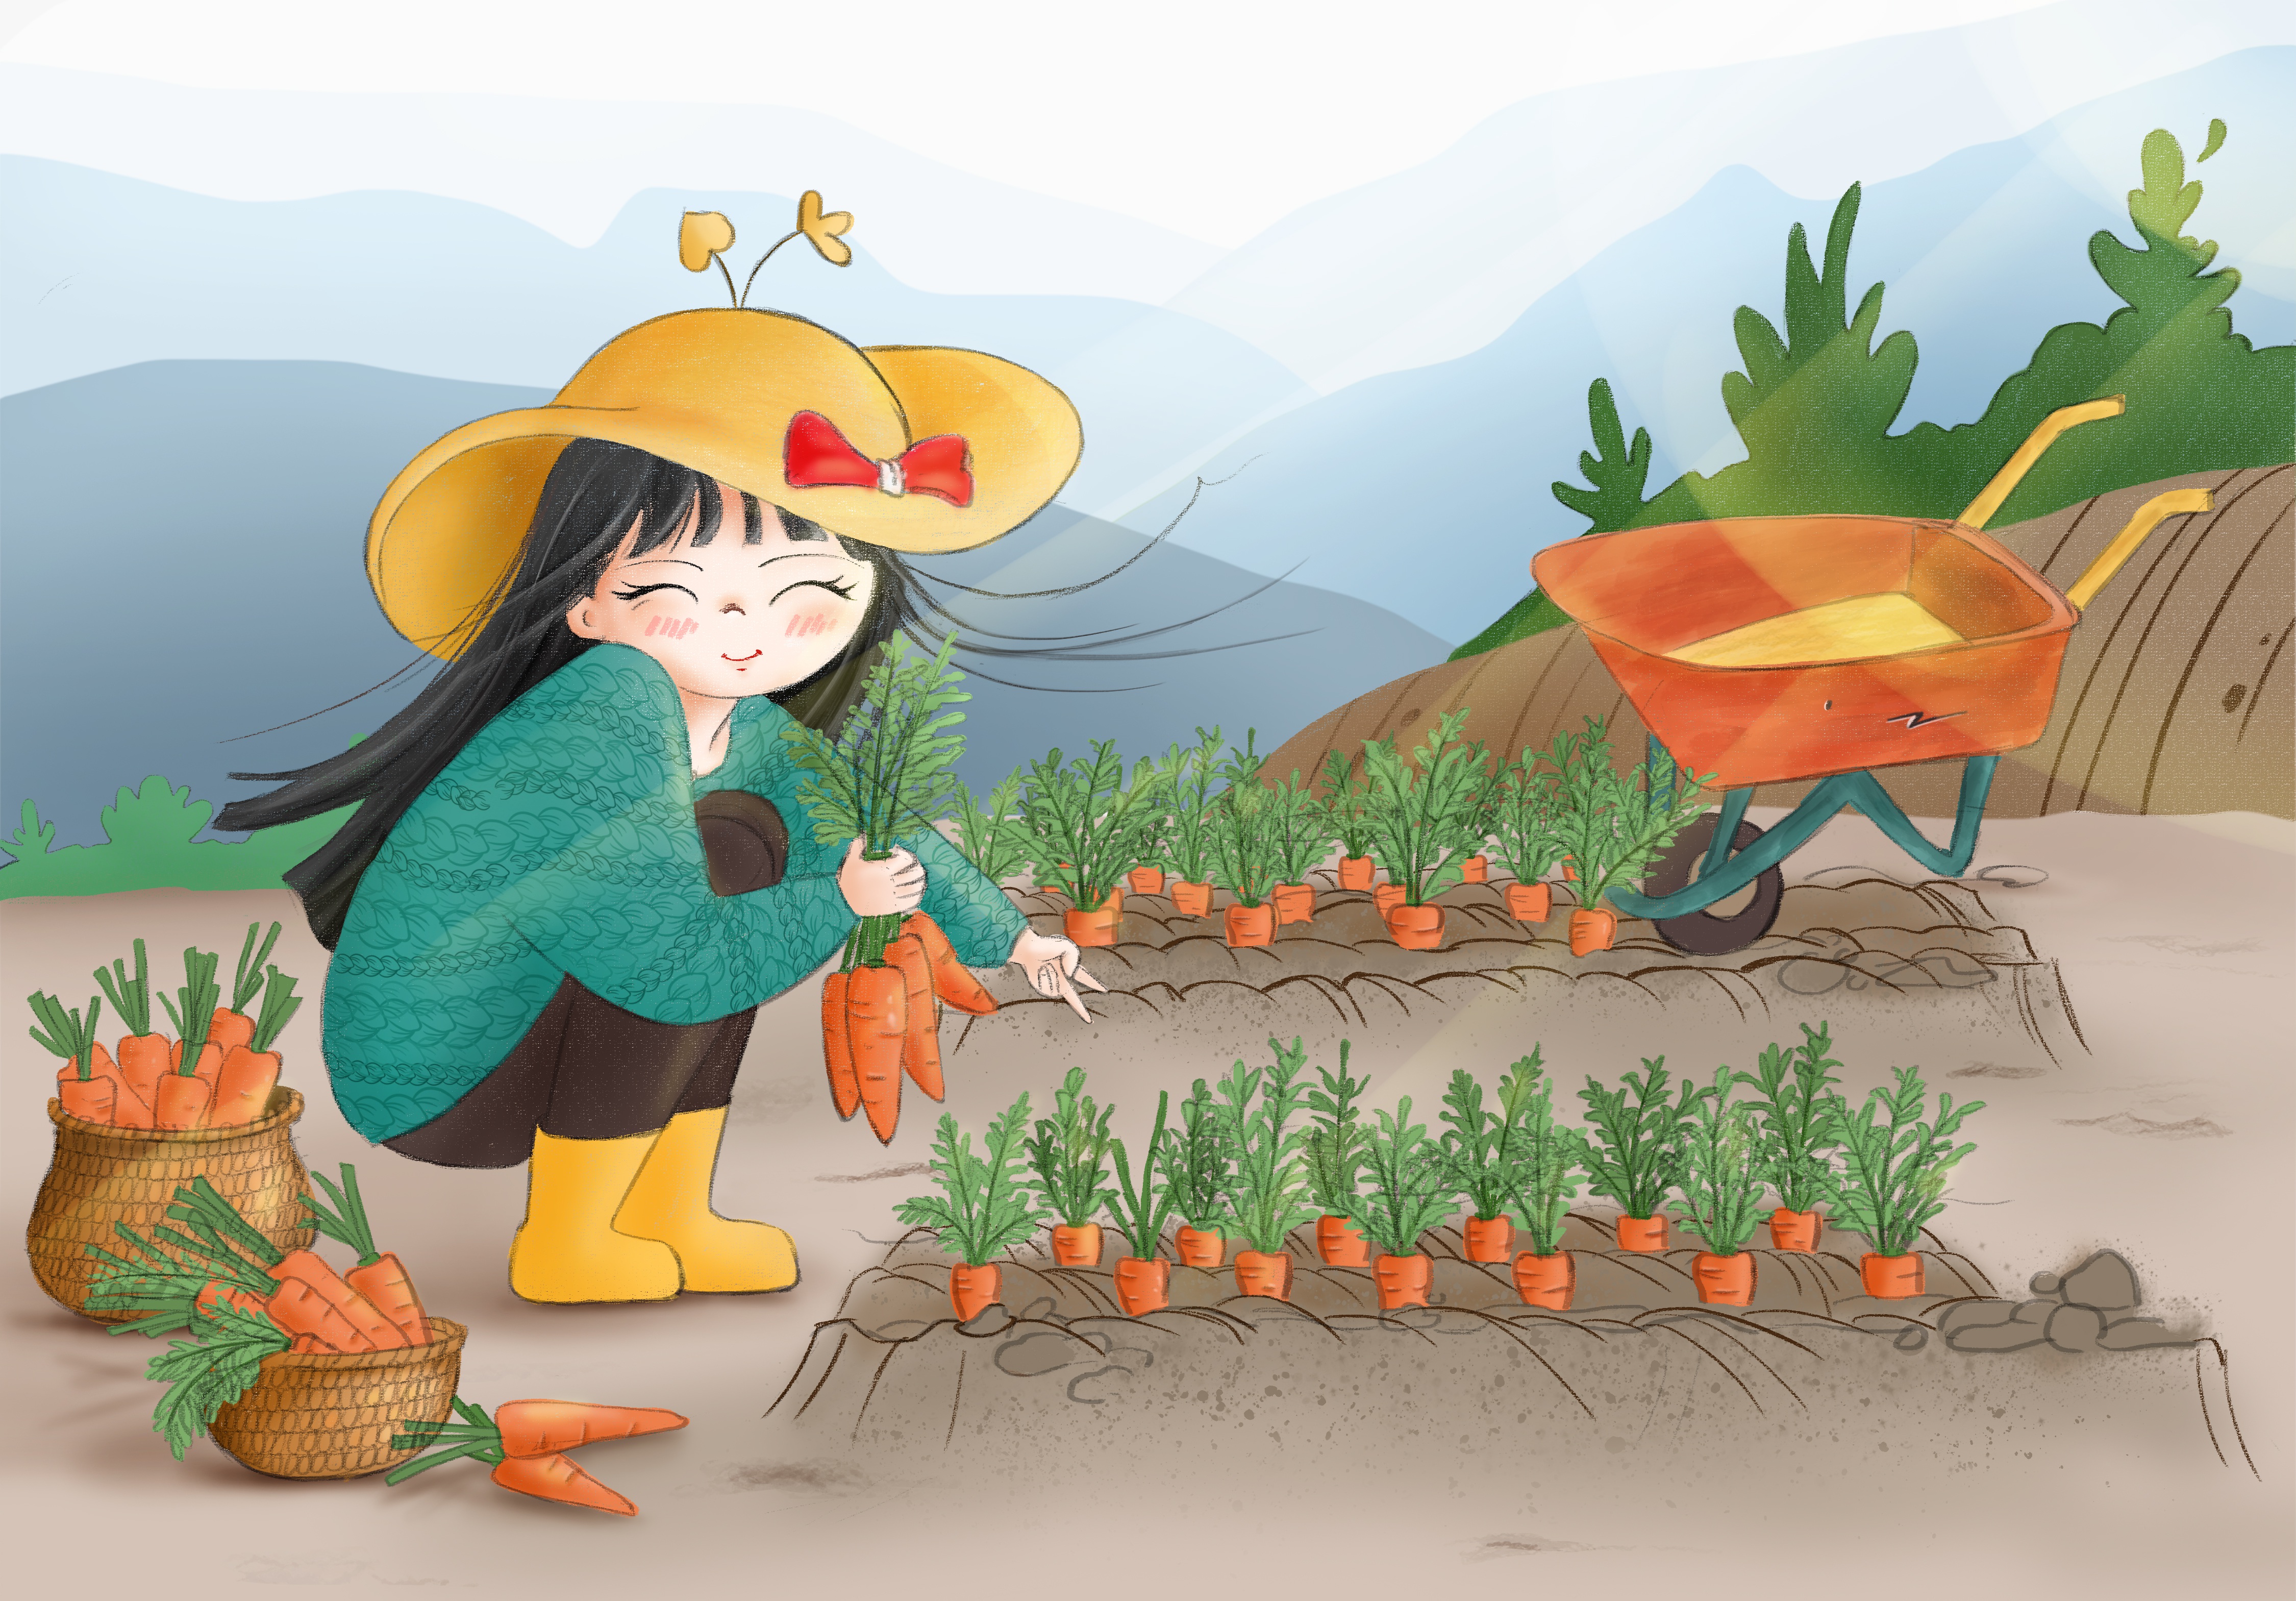 Illustration of a girl in a vegetable garden with carrots.